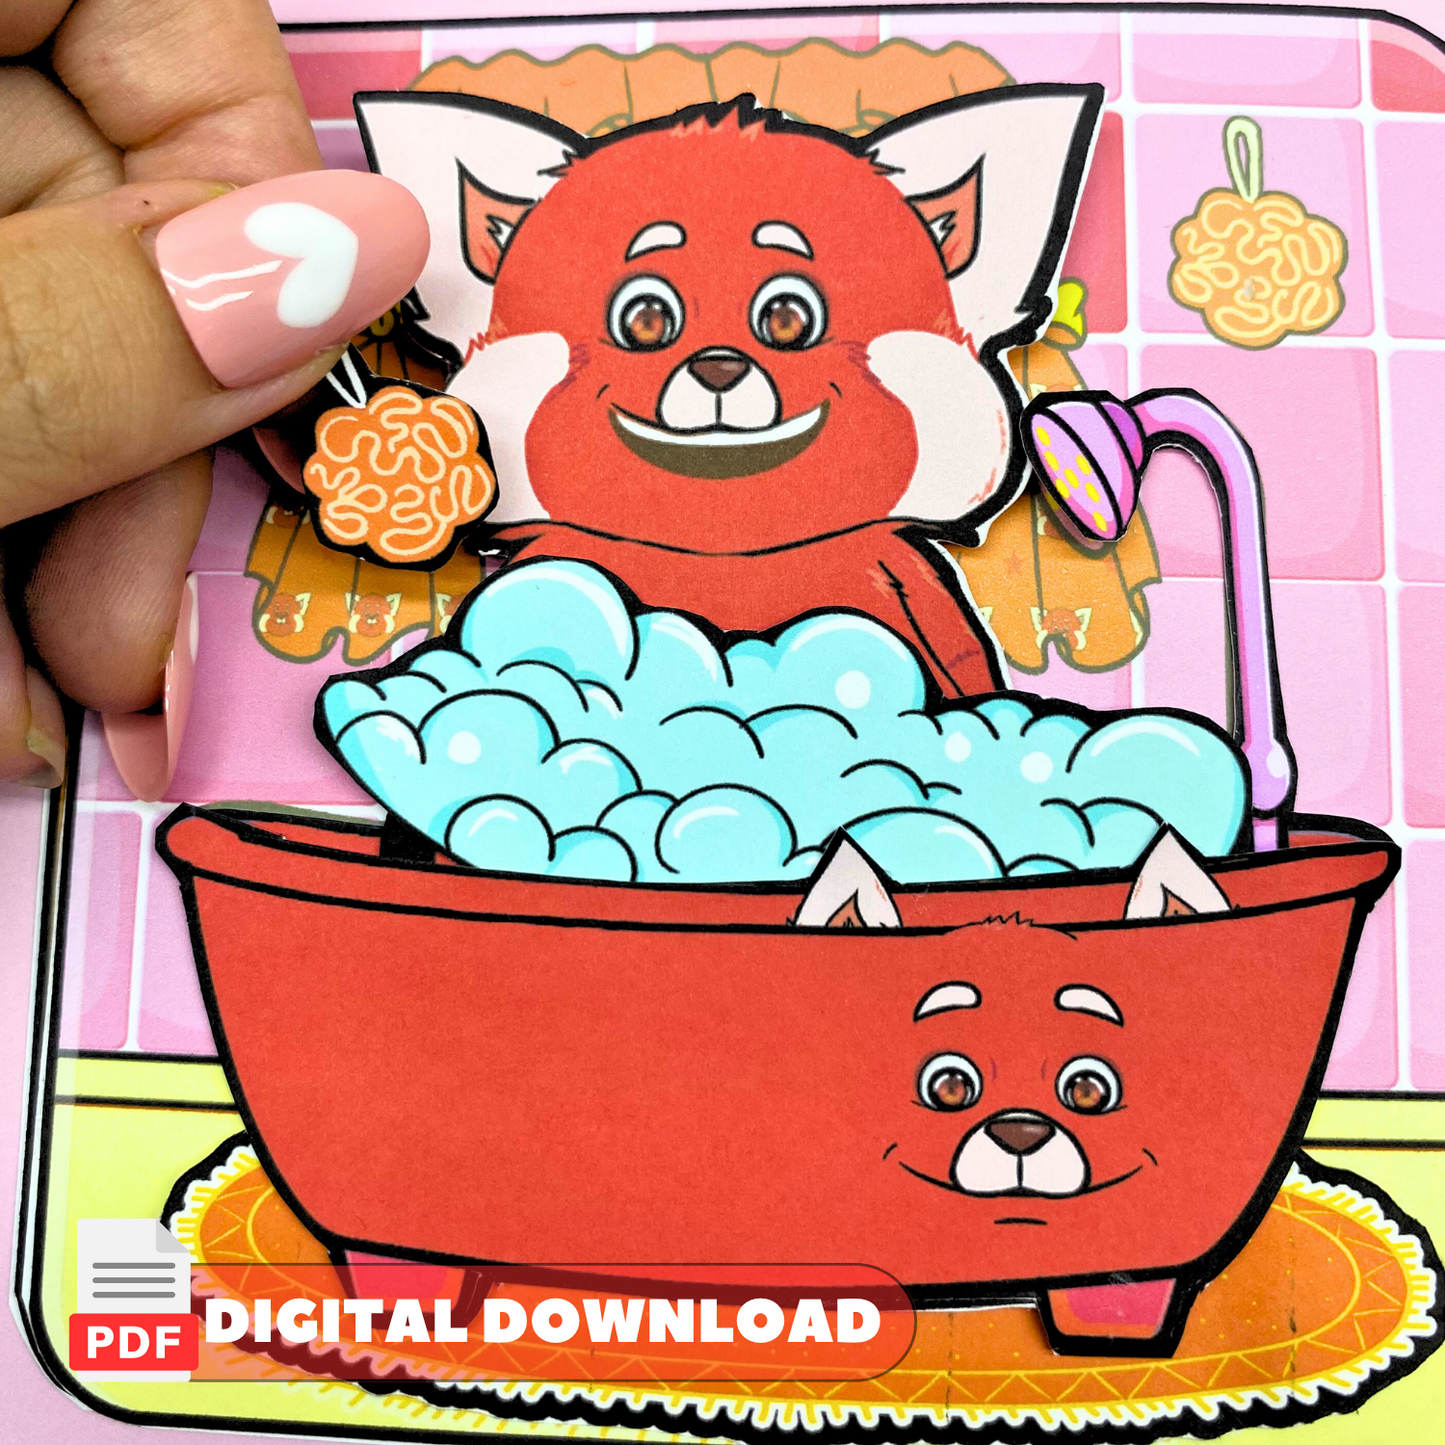 Cute Pet Dollhouse Printable DIY Activities for Kids 🌈 Orange Bear Dollhouse | Mini Busy Book, DIY quiet pages 🌈 Woa Doll Crafts